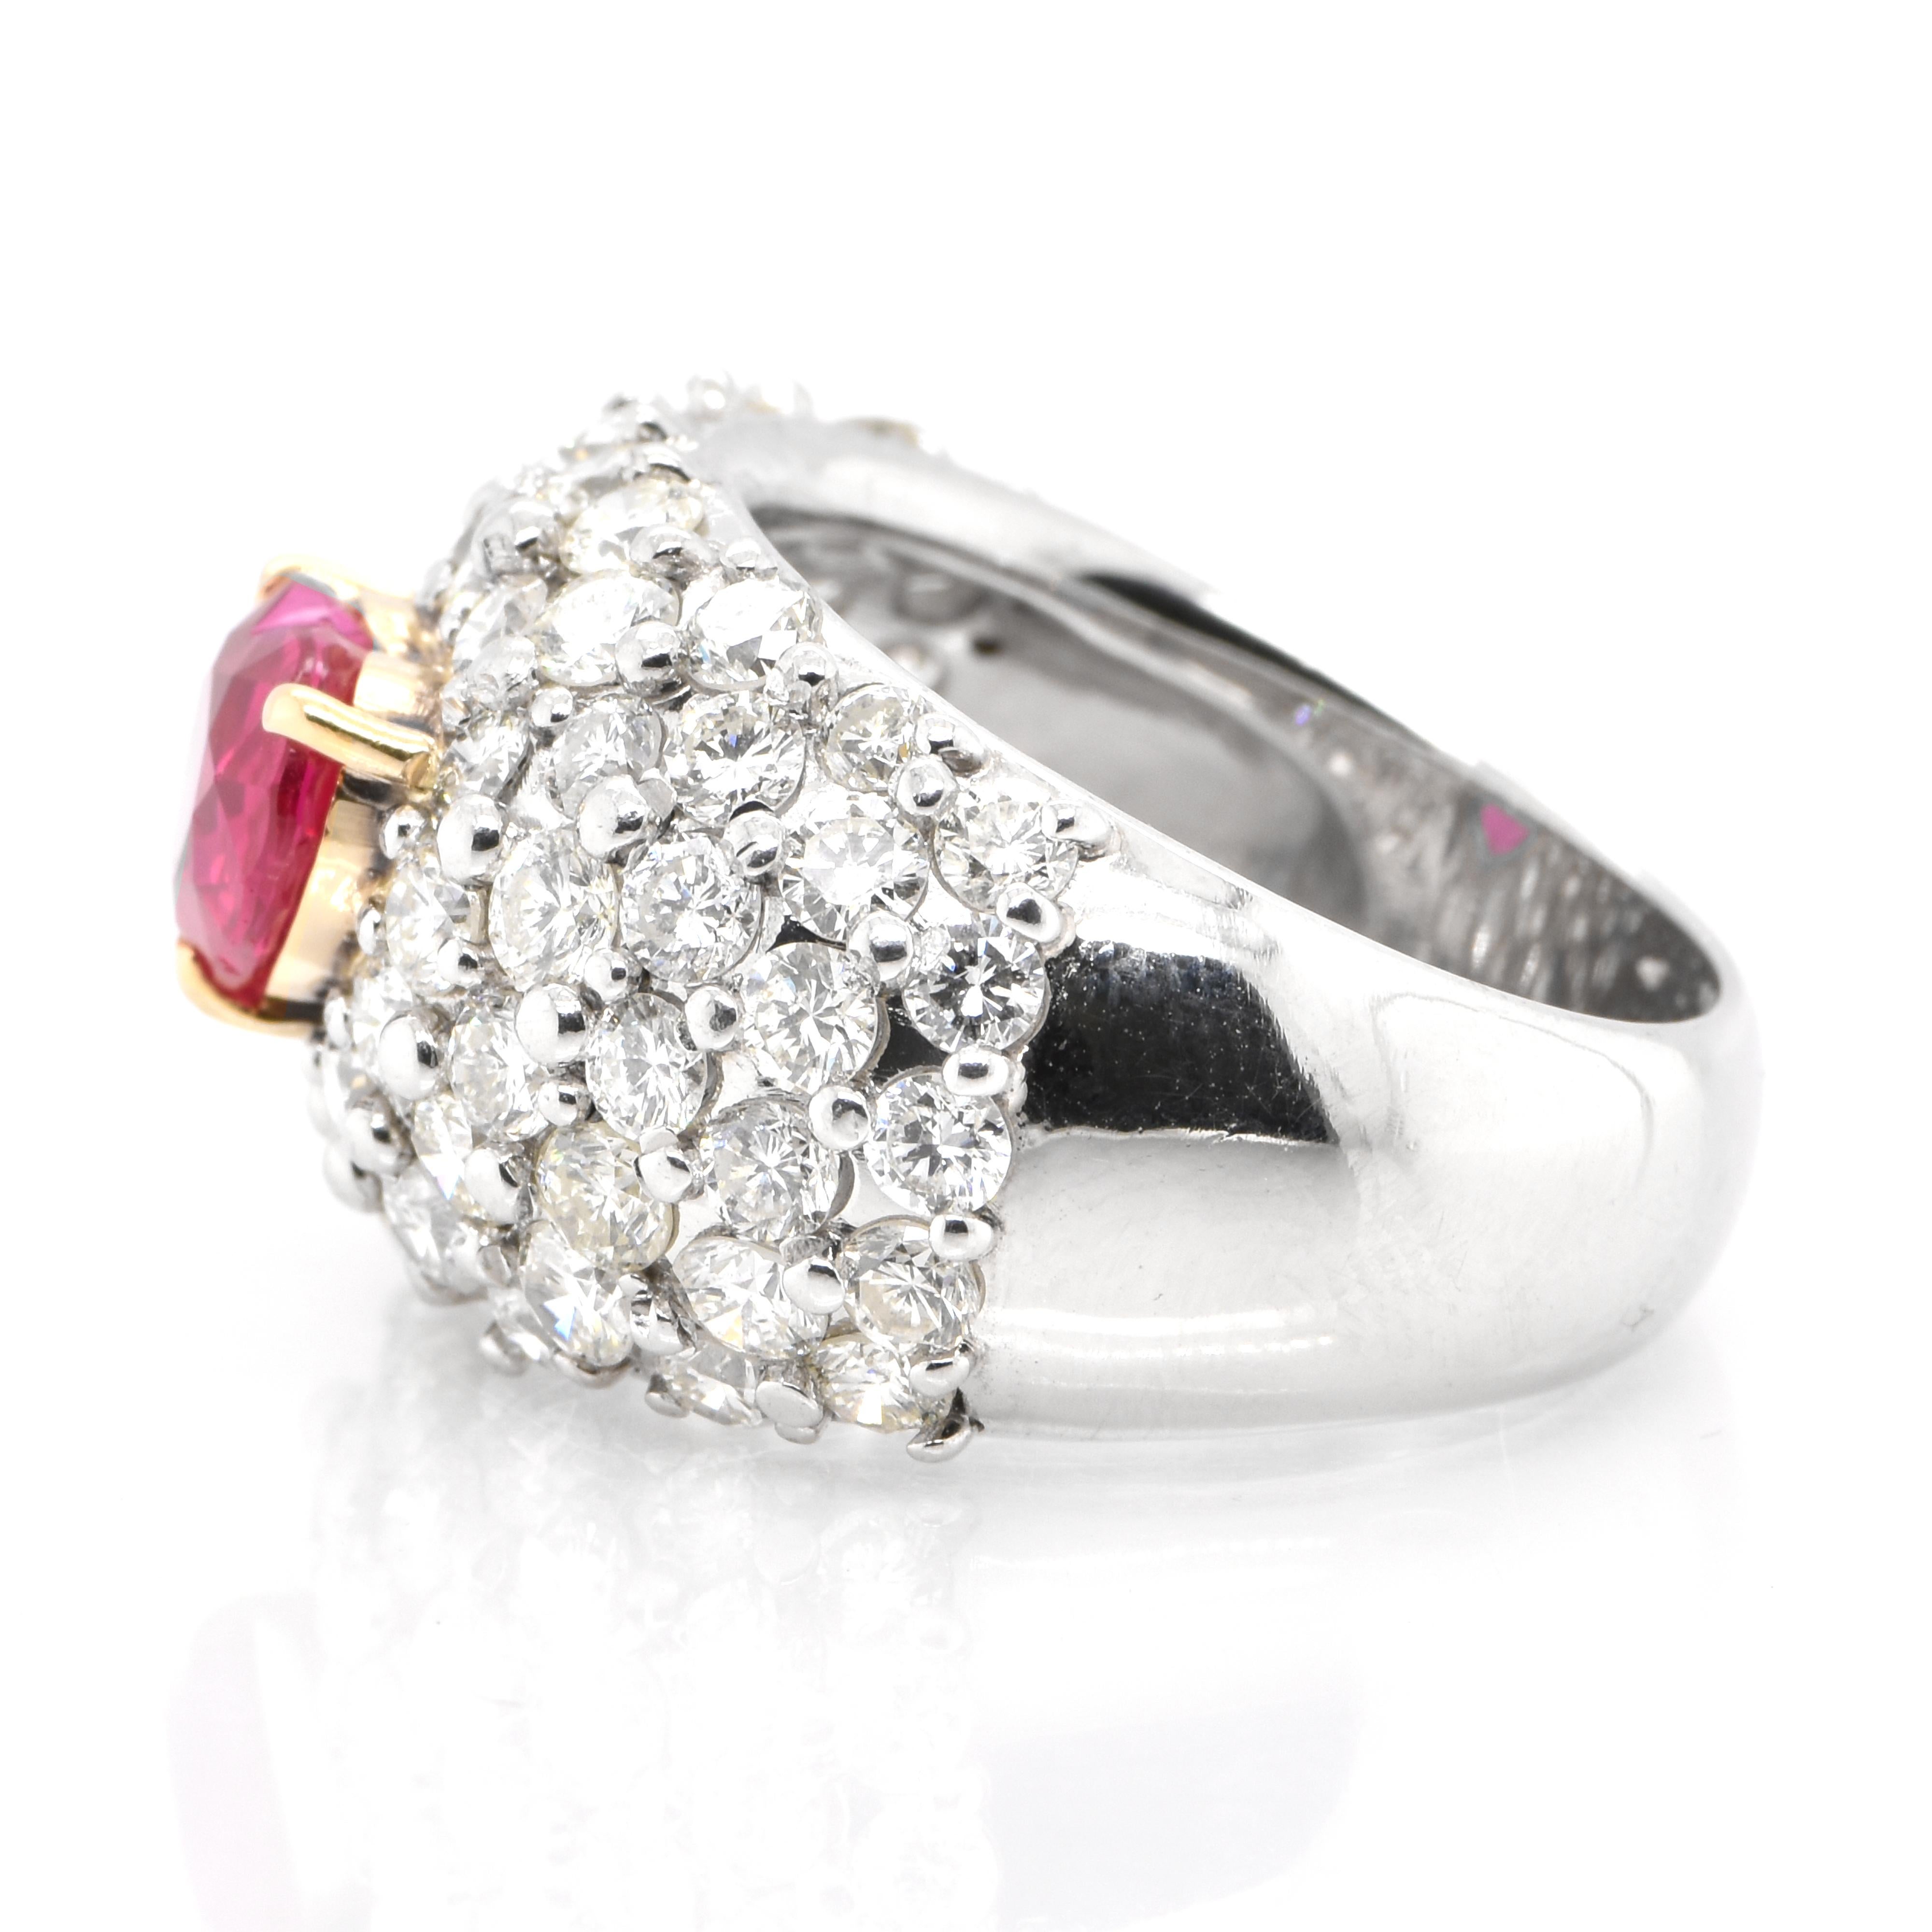 Heart Cut GIA Certified 2.10 Carat Natural Burmese Ruby Ring Set in Platinum and 18k Gold For Sale